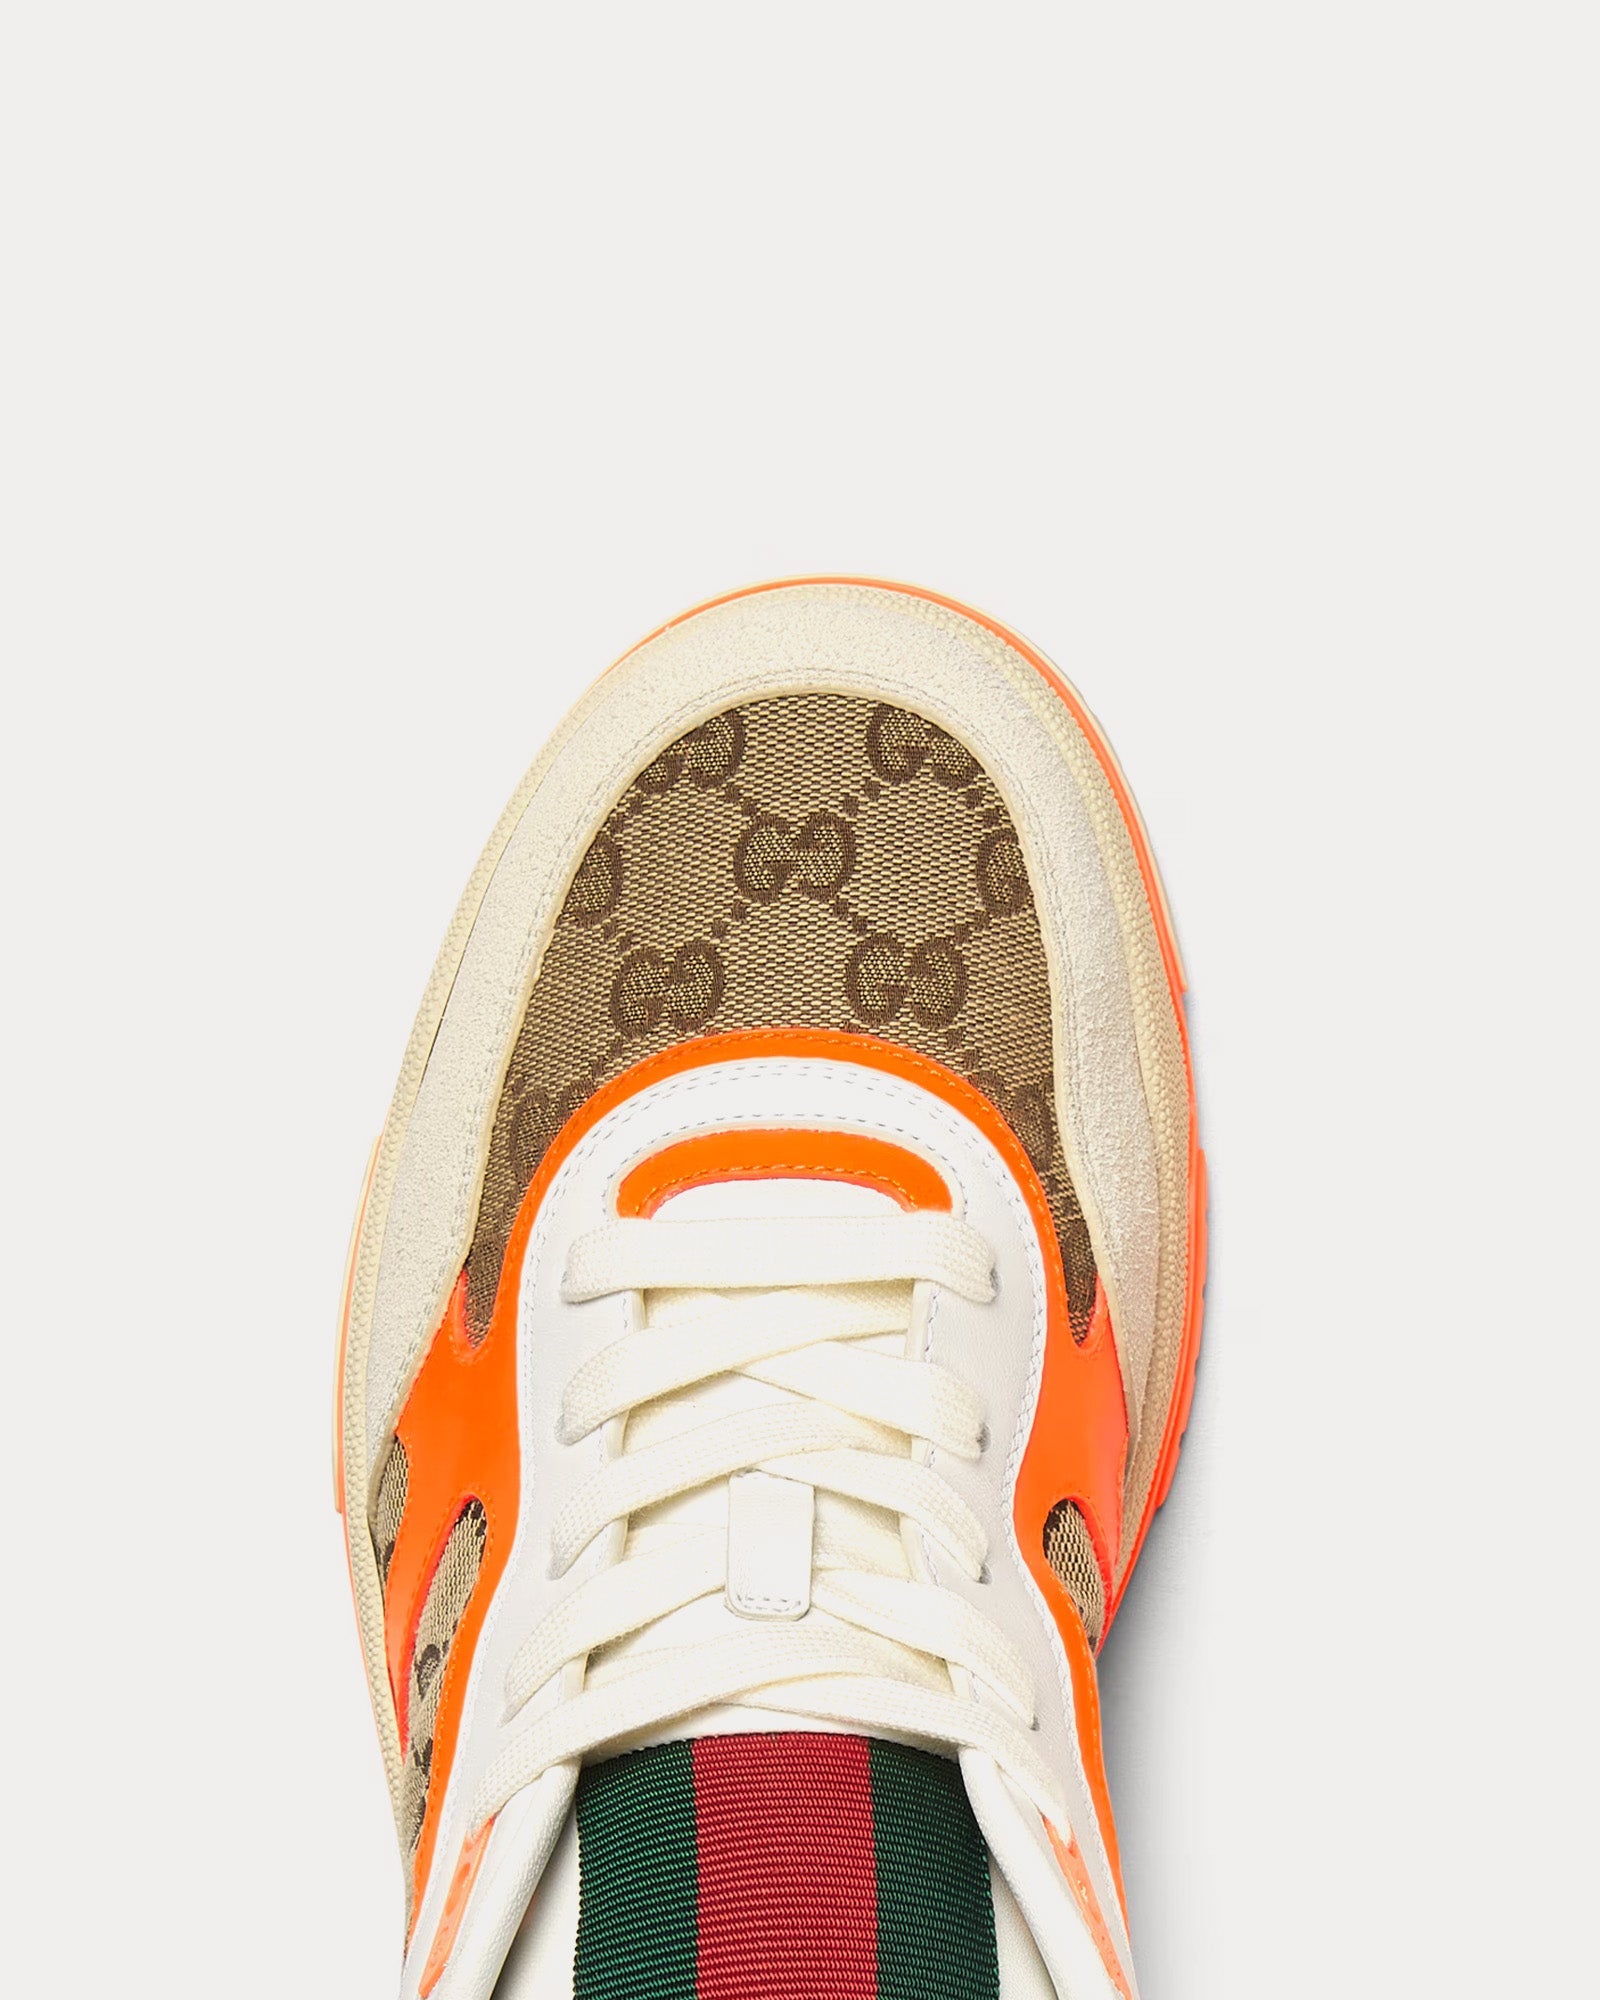 Gucci - Re-Web Leather with Original GG Canvas White / Orange Low Top Sneakers